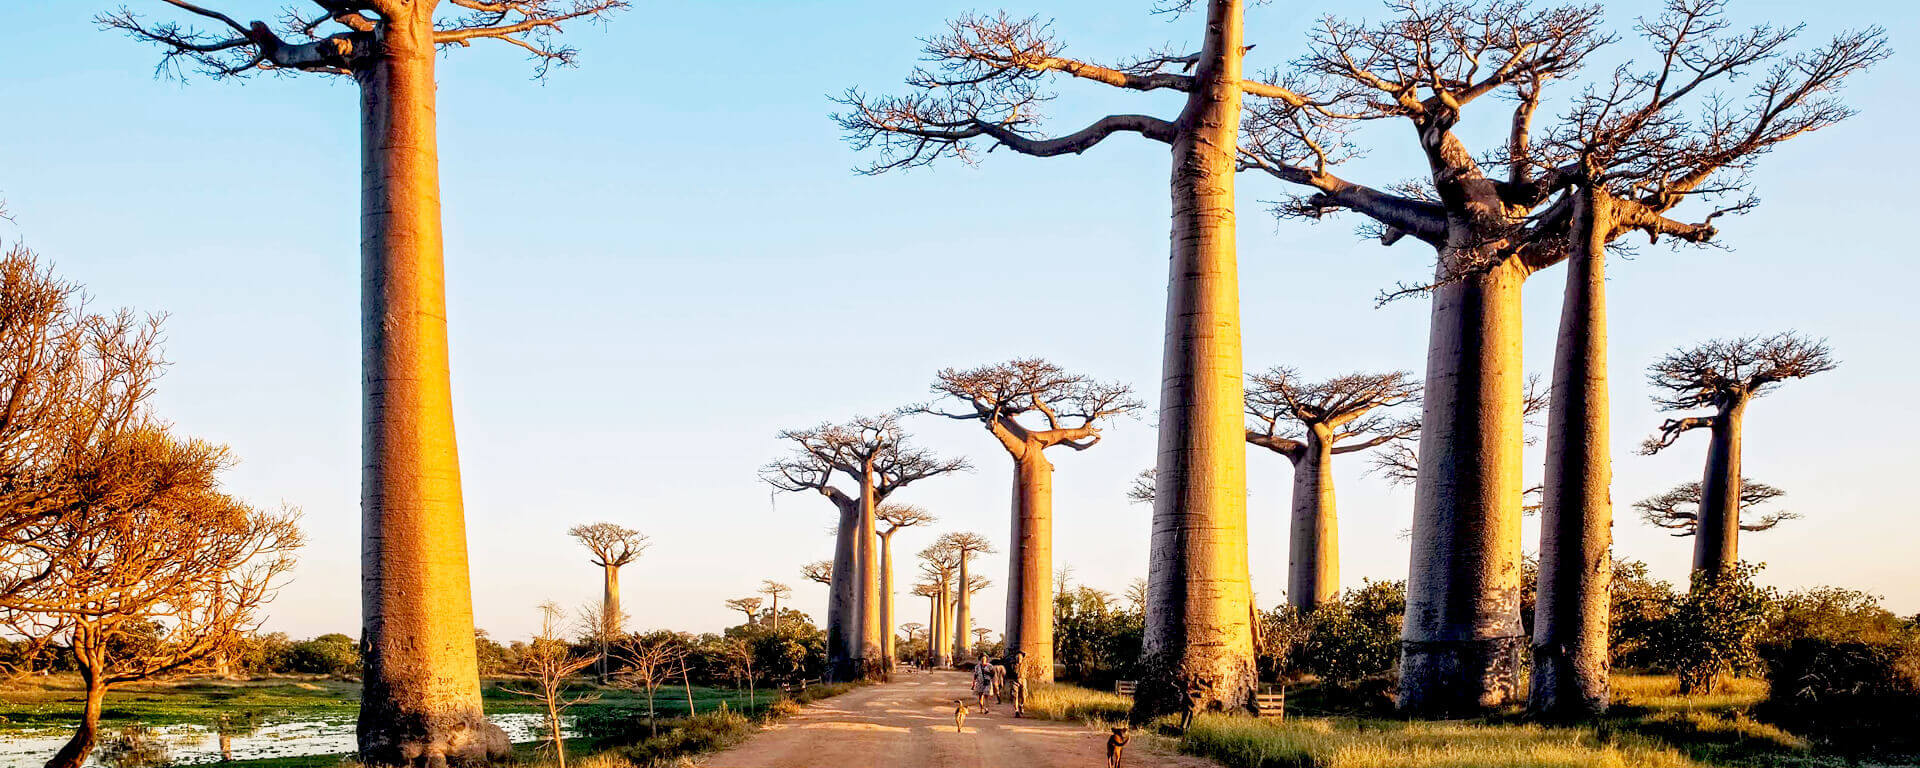 madagascar landmarks and tourist attractions